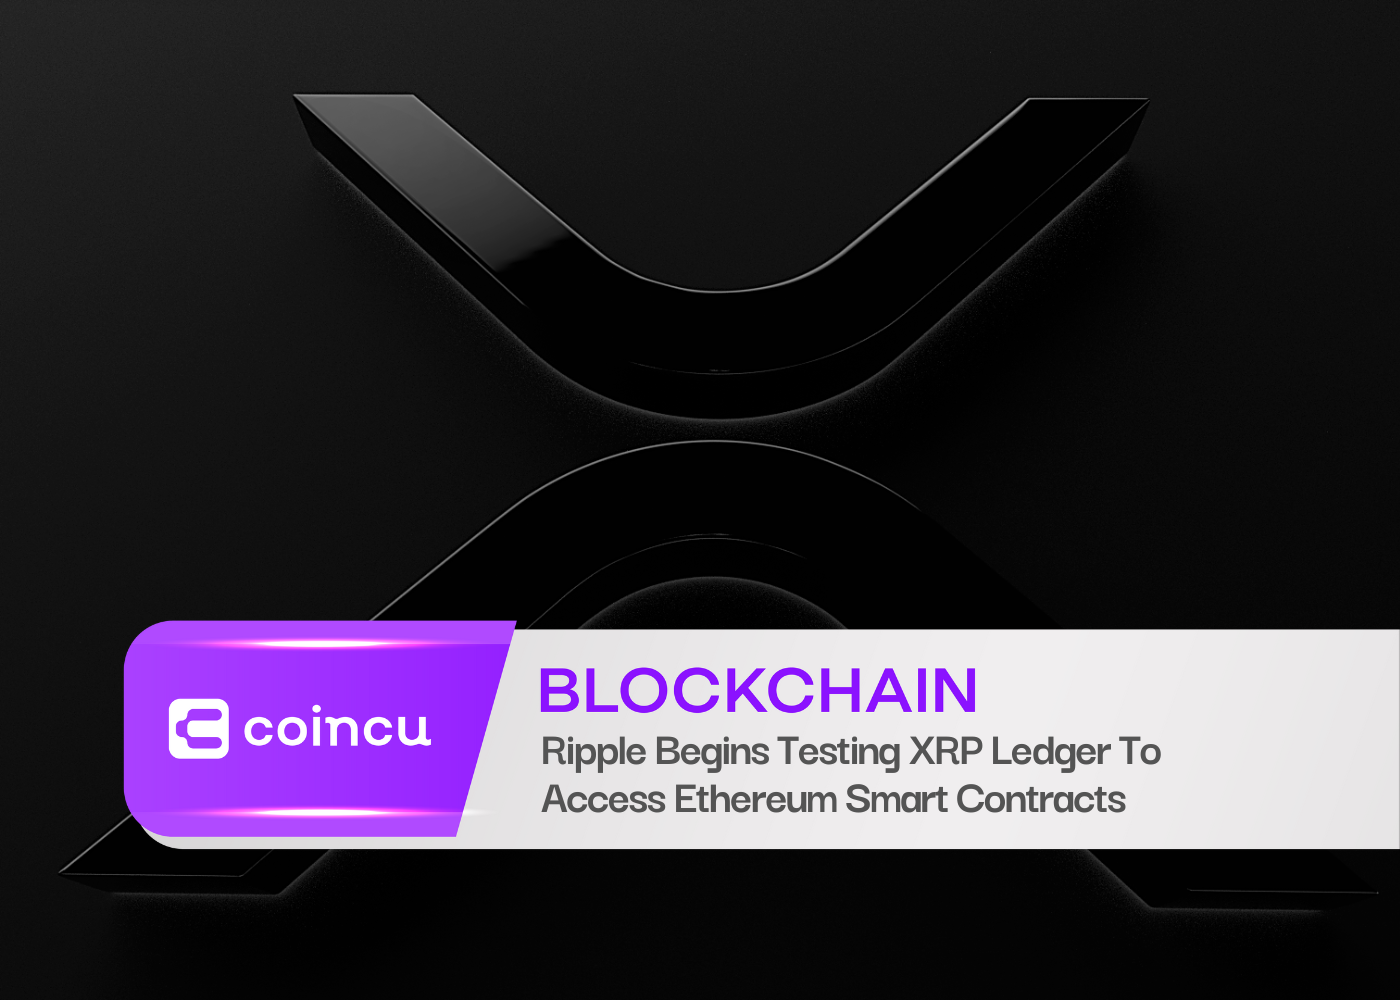 Ripple Begins Testing XRP Ledger To Access Ethereum Smart Contracts